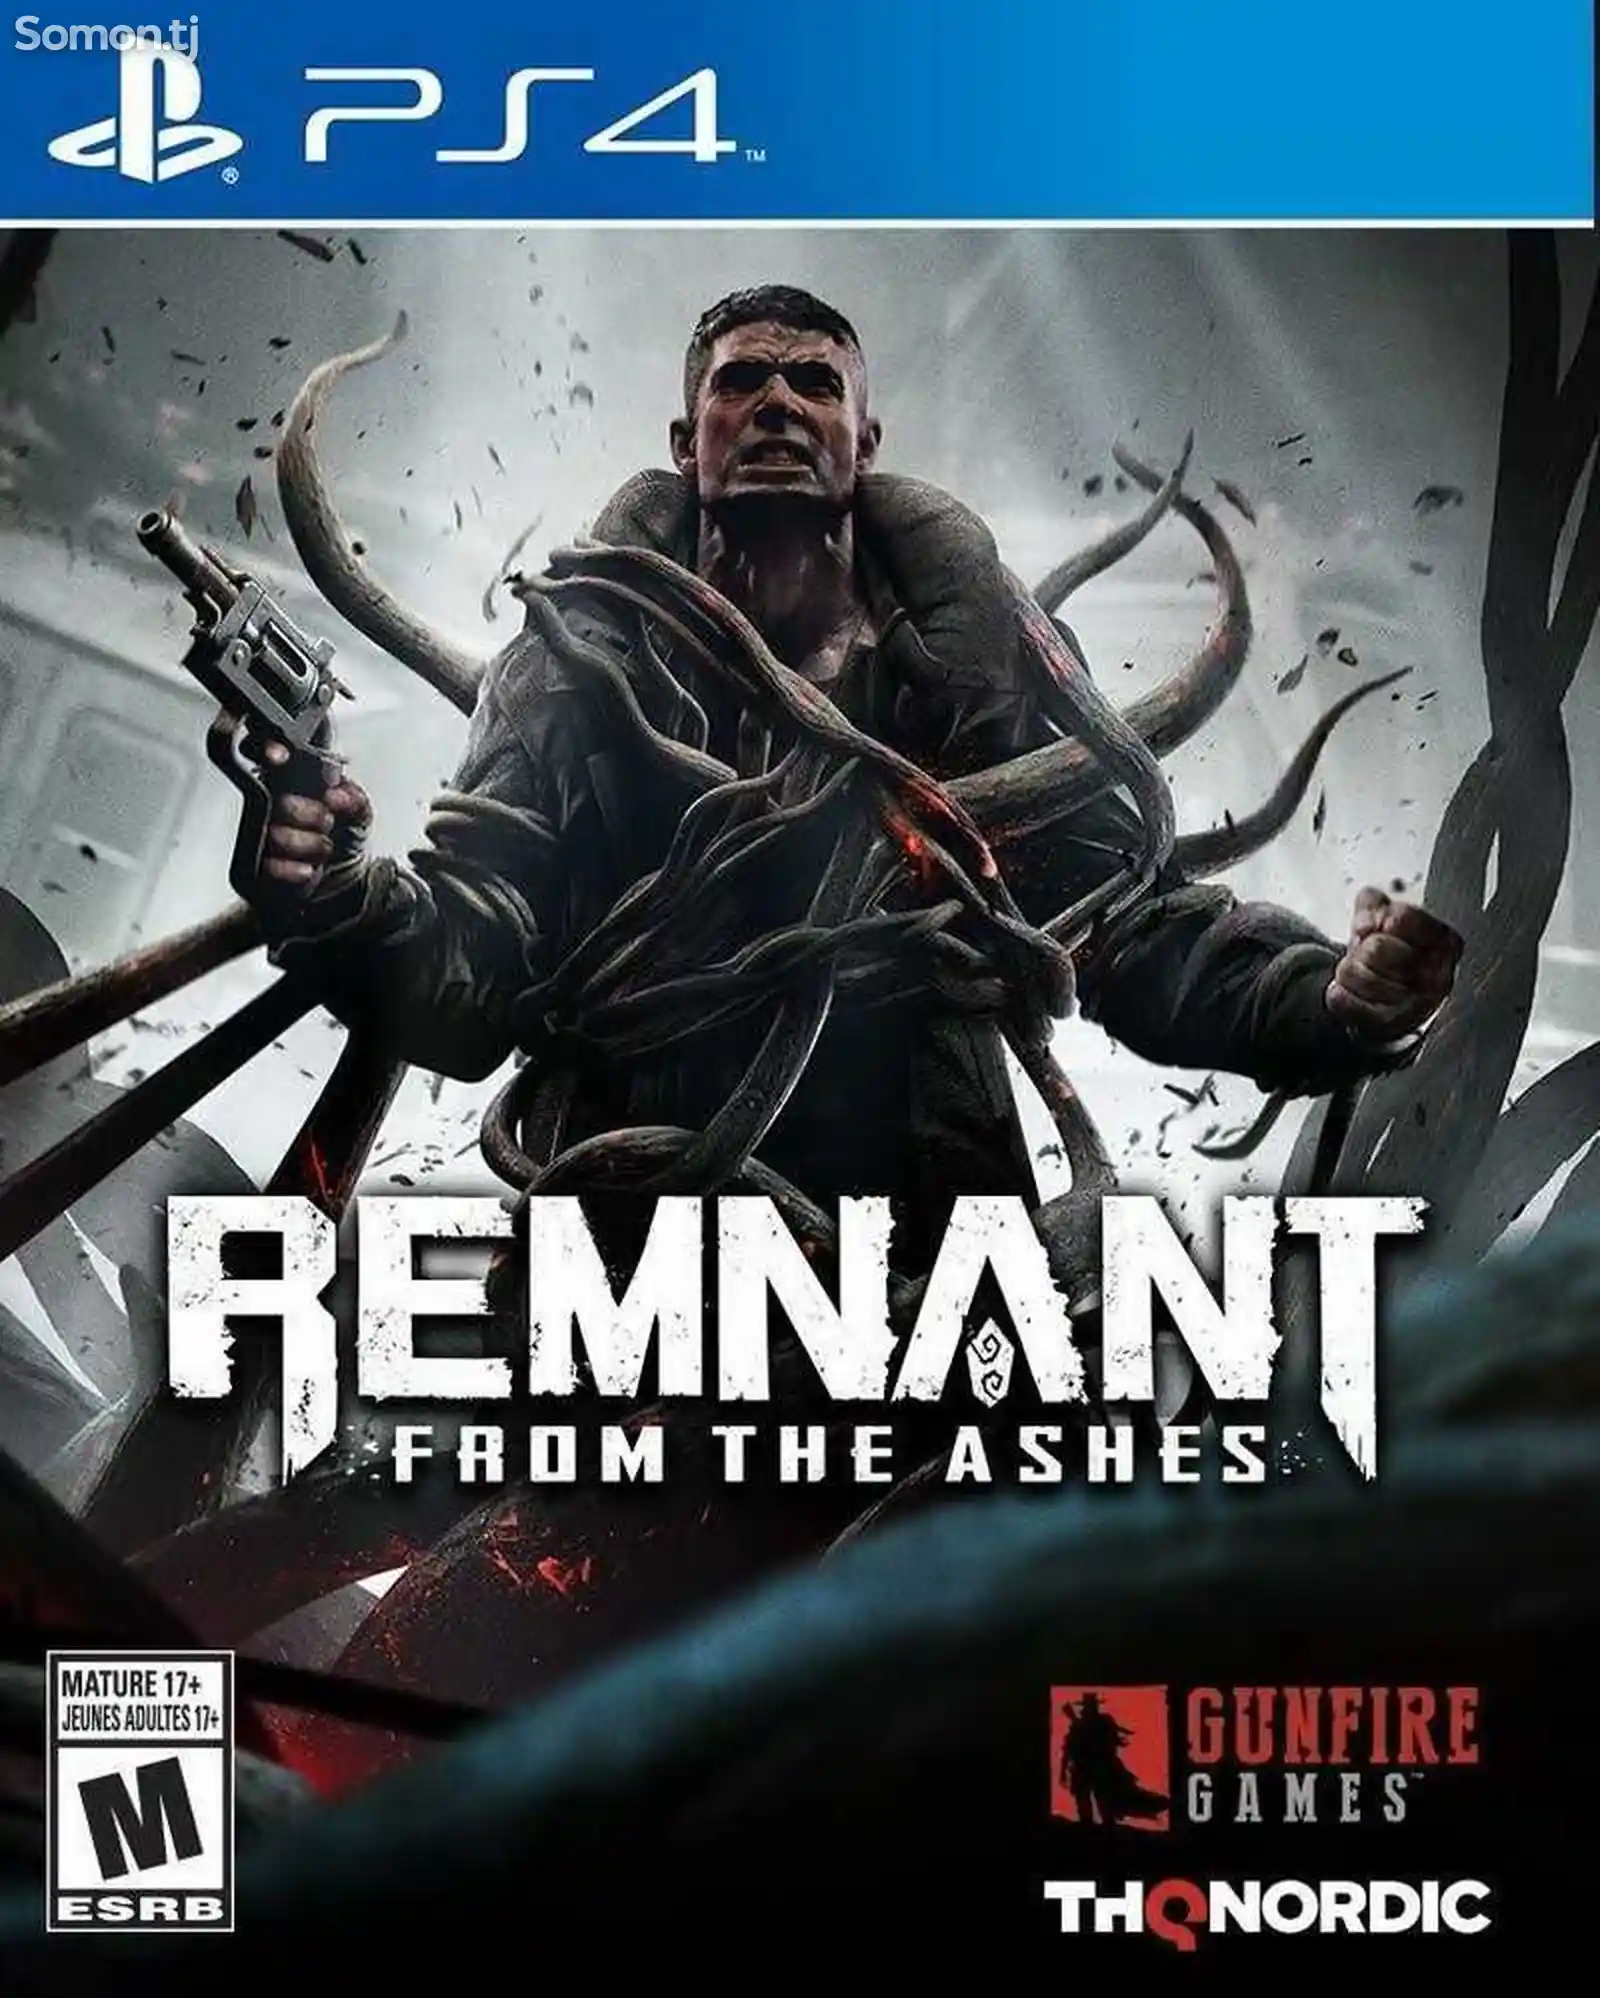 Игра Remnant from the ashes для PS-4 / 5.05 / 6.72 / 7.02 / 7.55 / 9.00 /-1